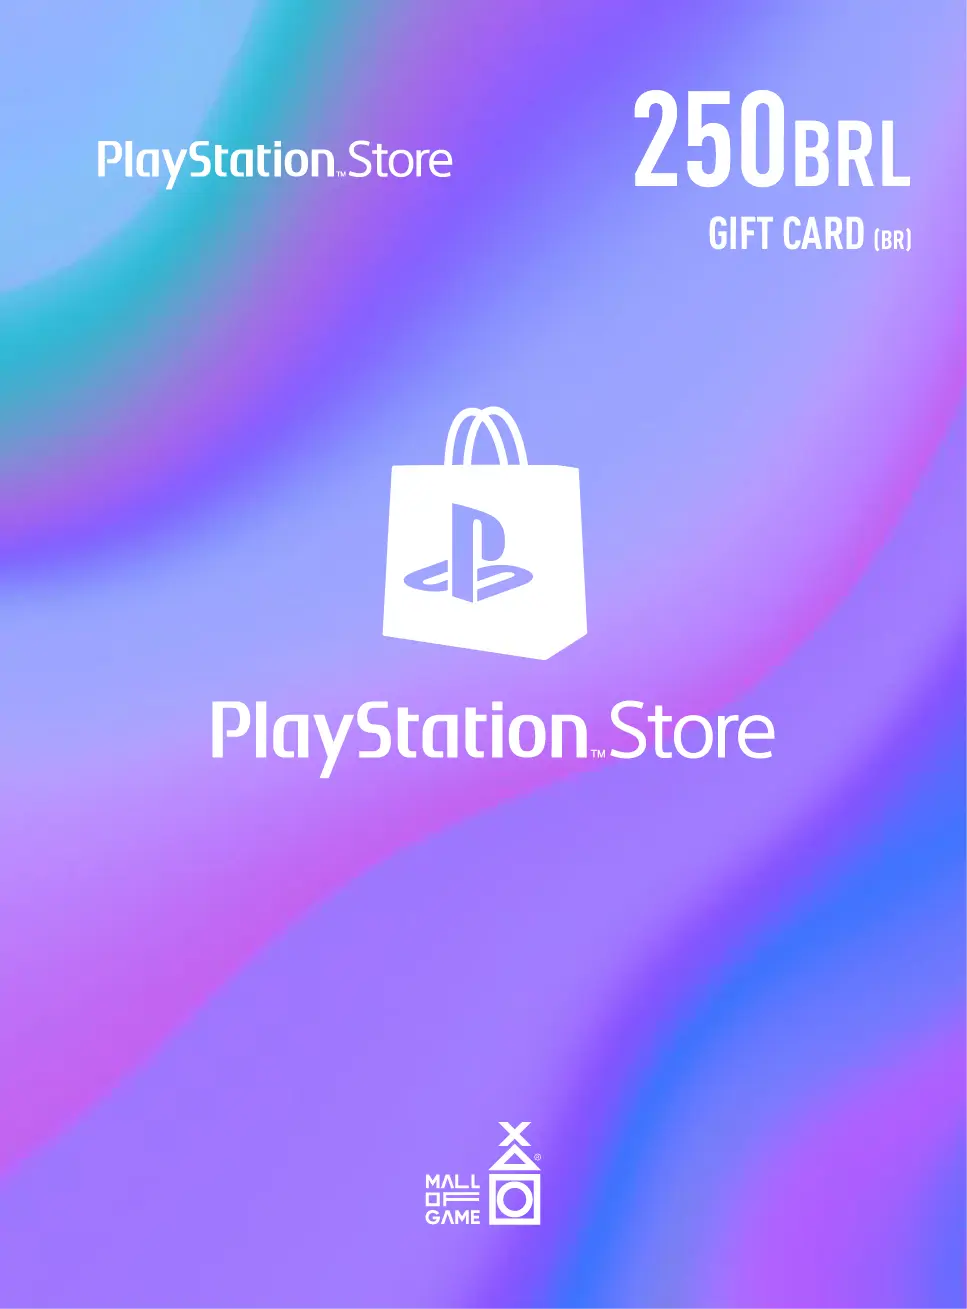 PlayStation™Store BRL250 Gift Cards (BR)